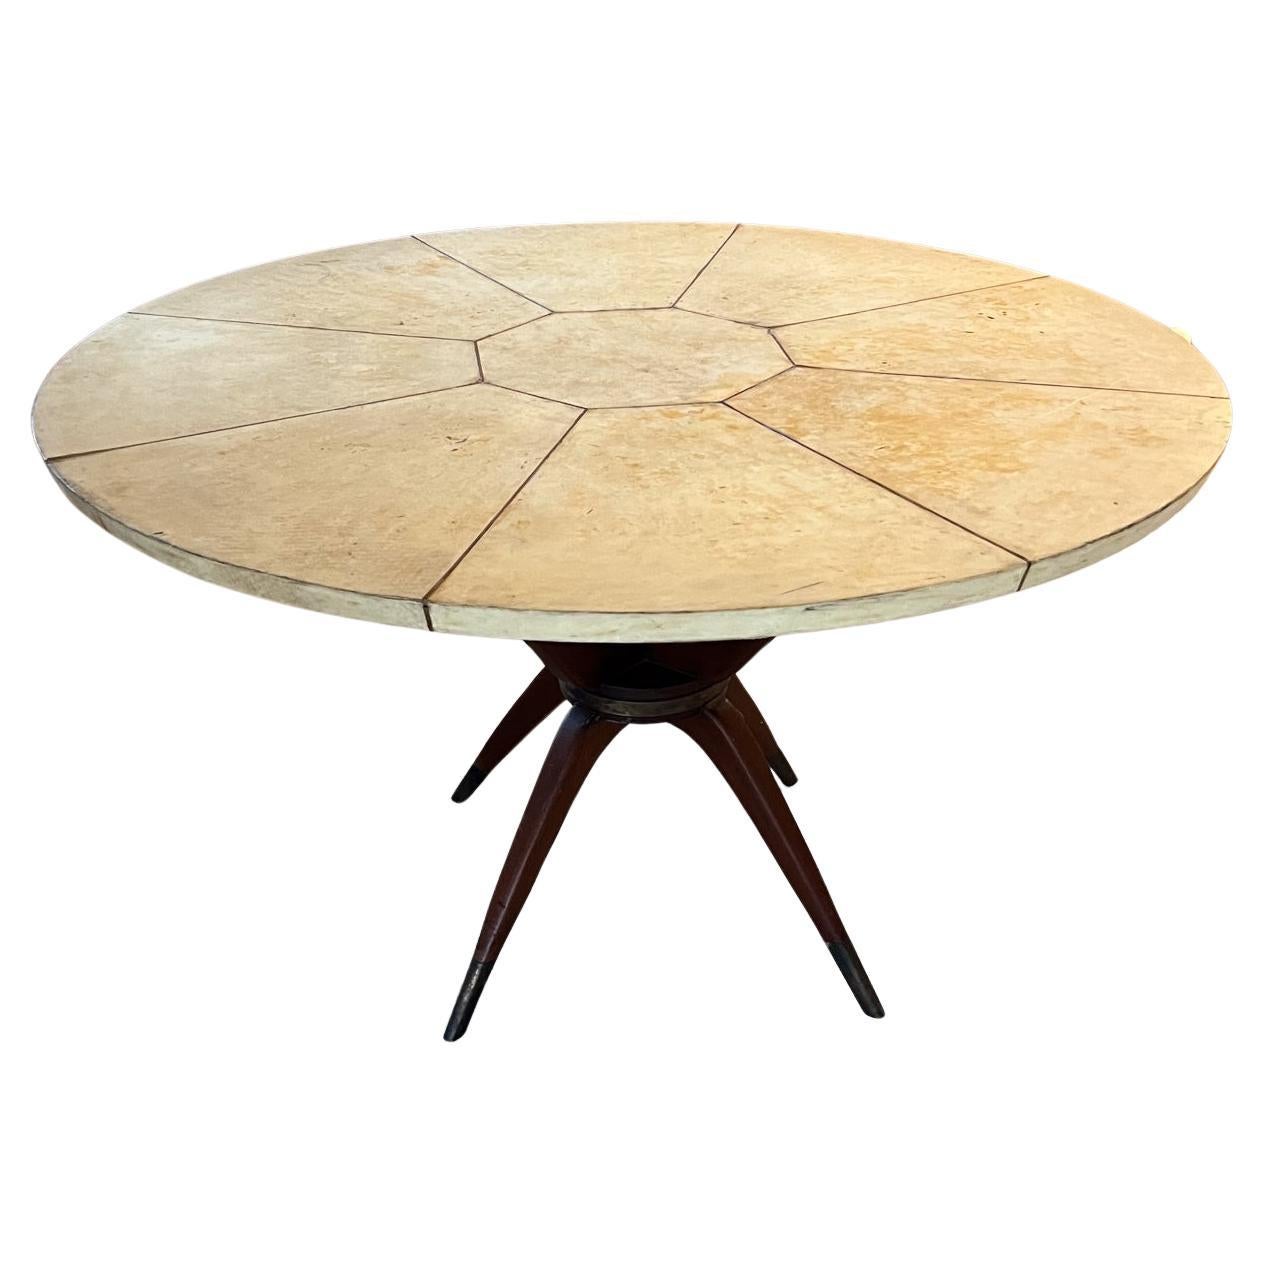 1950s Sculptural Pani Dining Table Goatskin Mahogany & Brass Mexico City For Sale